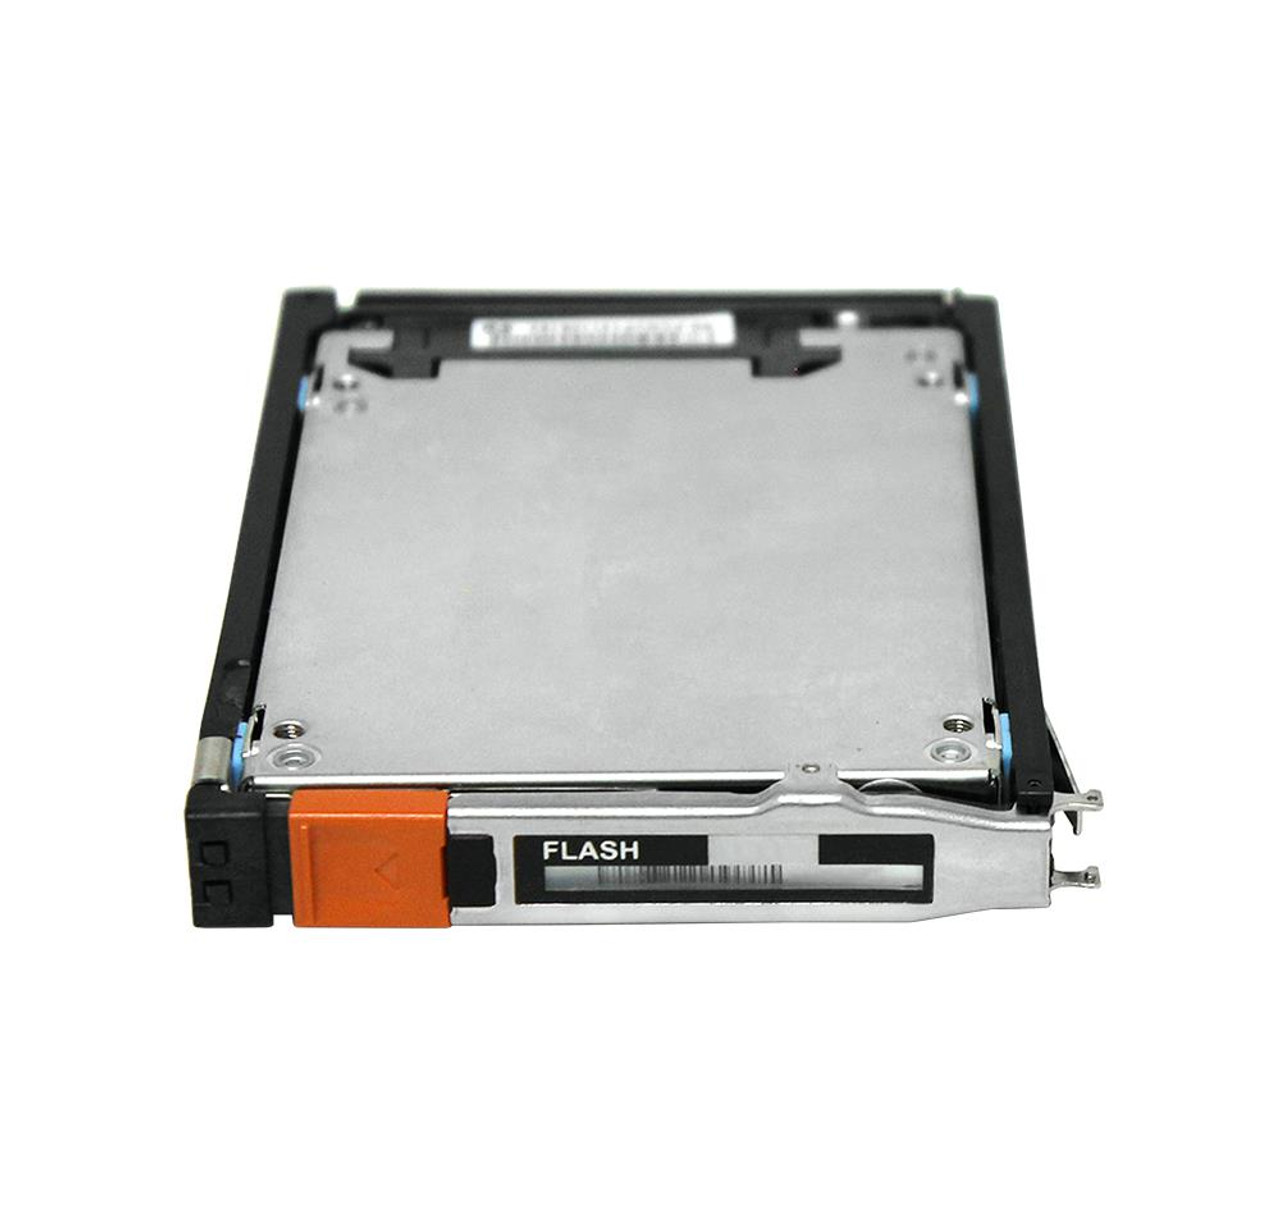 5052521 EMC 1.92TB SAS 12Gbps 2.5-inch Internal Solid State Drive (SSD) for Unity 25-Disk/80-Disk DAE All Flash Pool